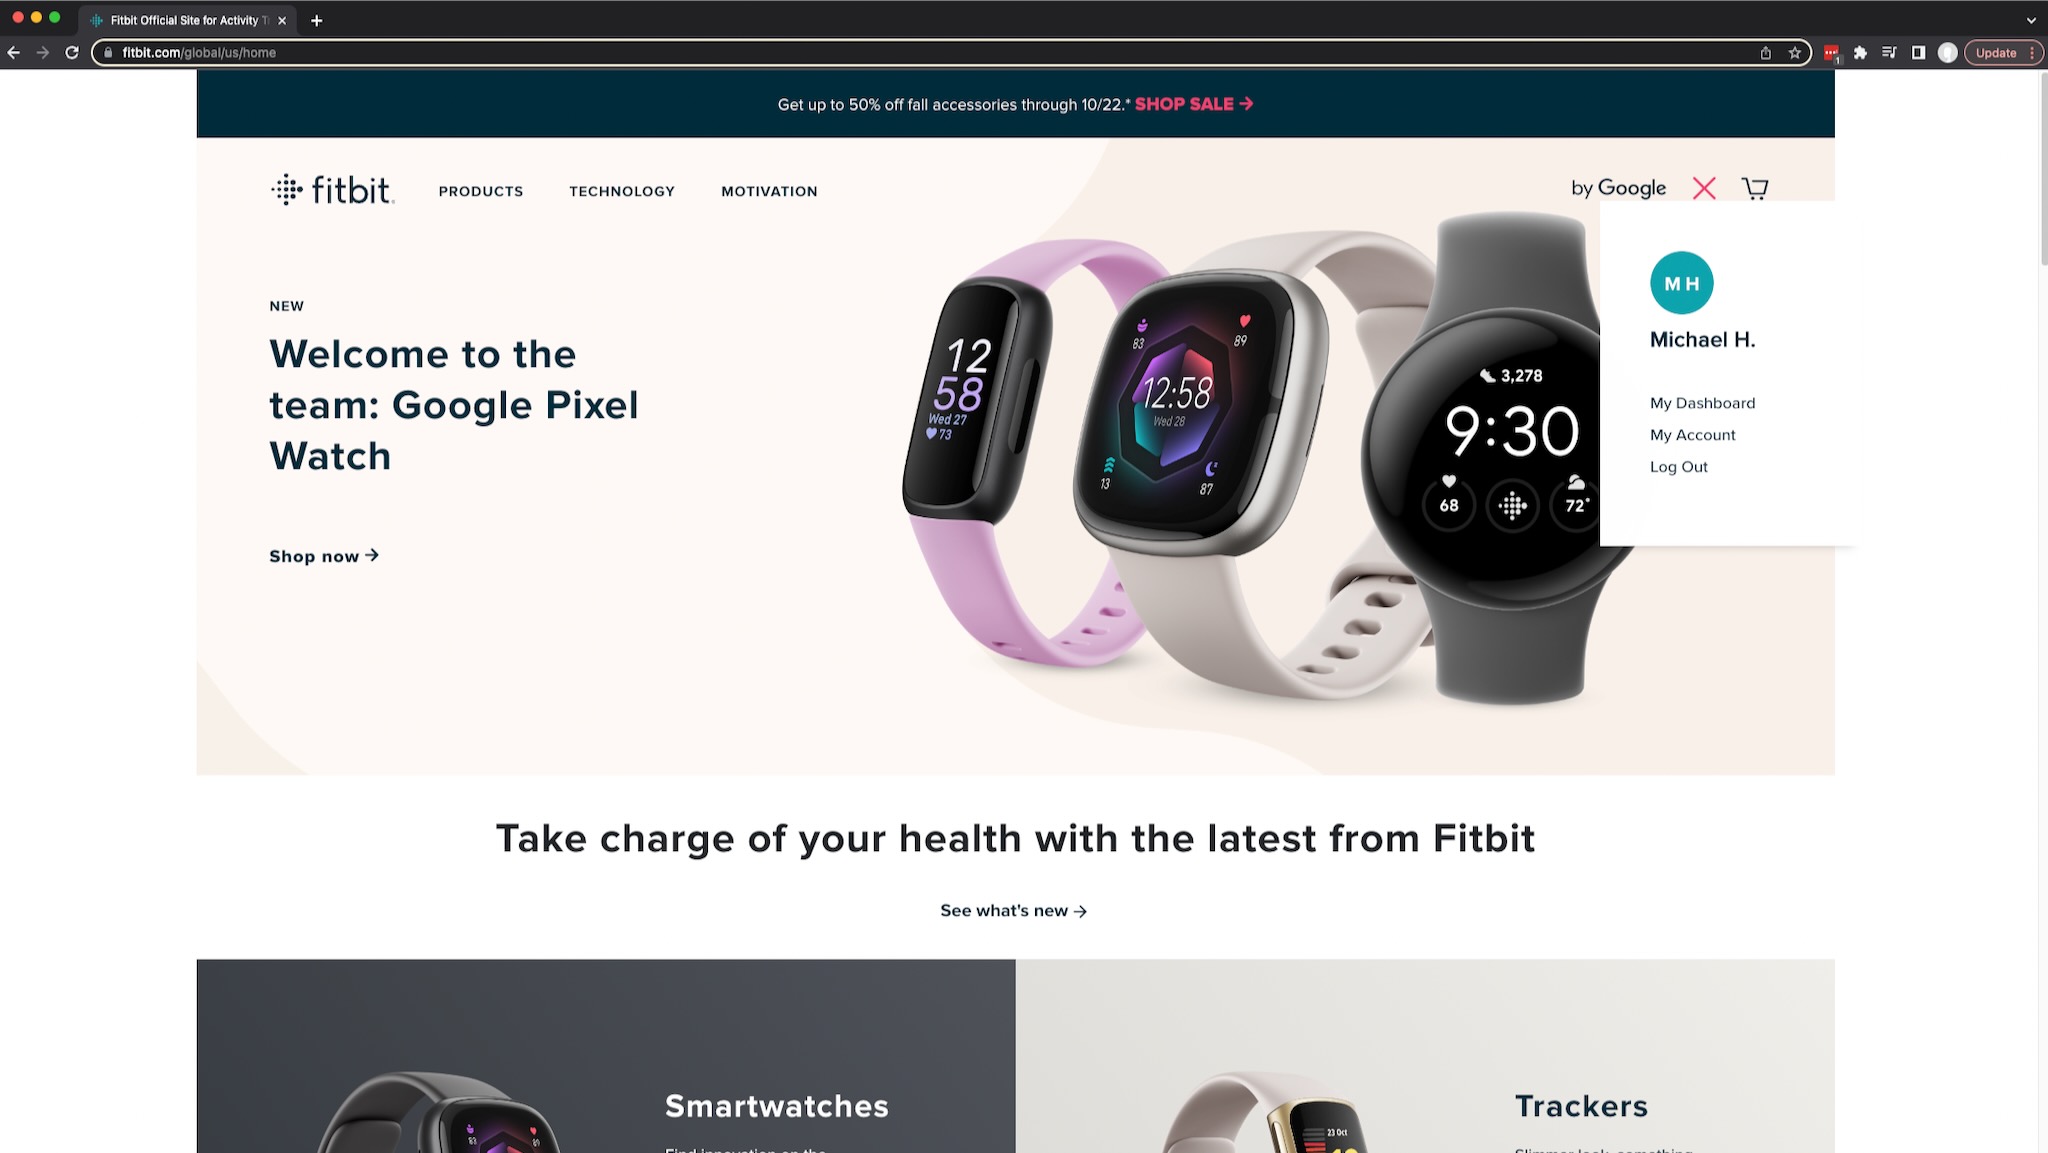 The Fitbit web home page. The account icon has been clicked, showing options to check your profile and account.